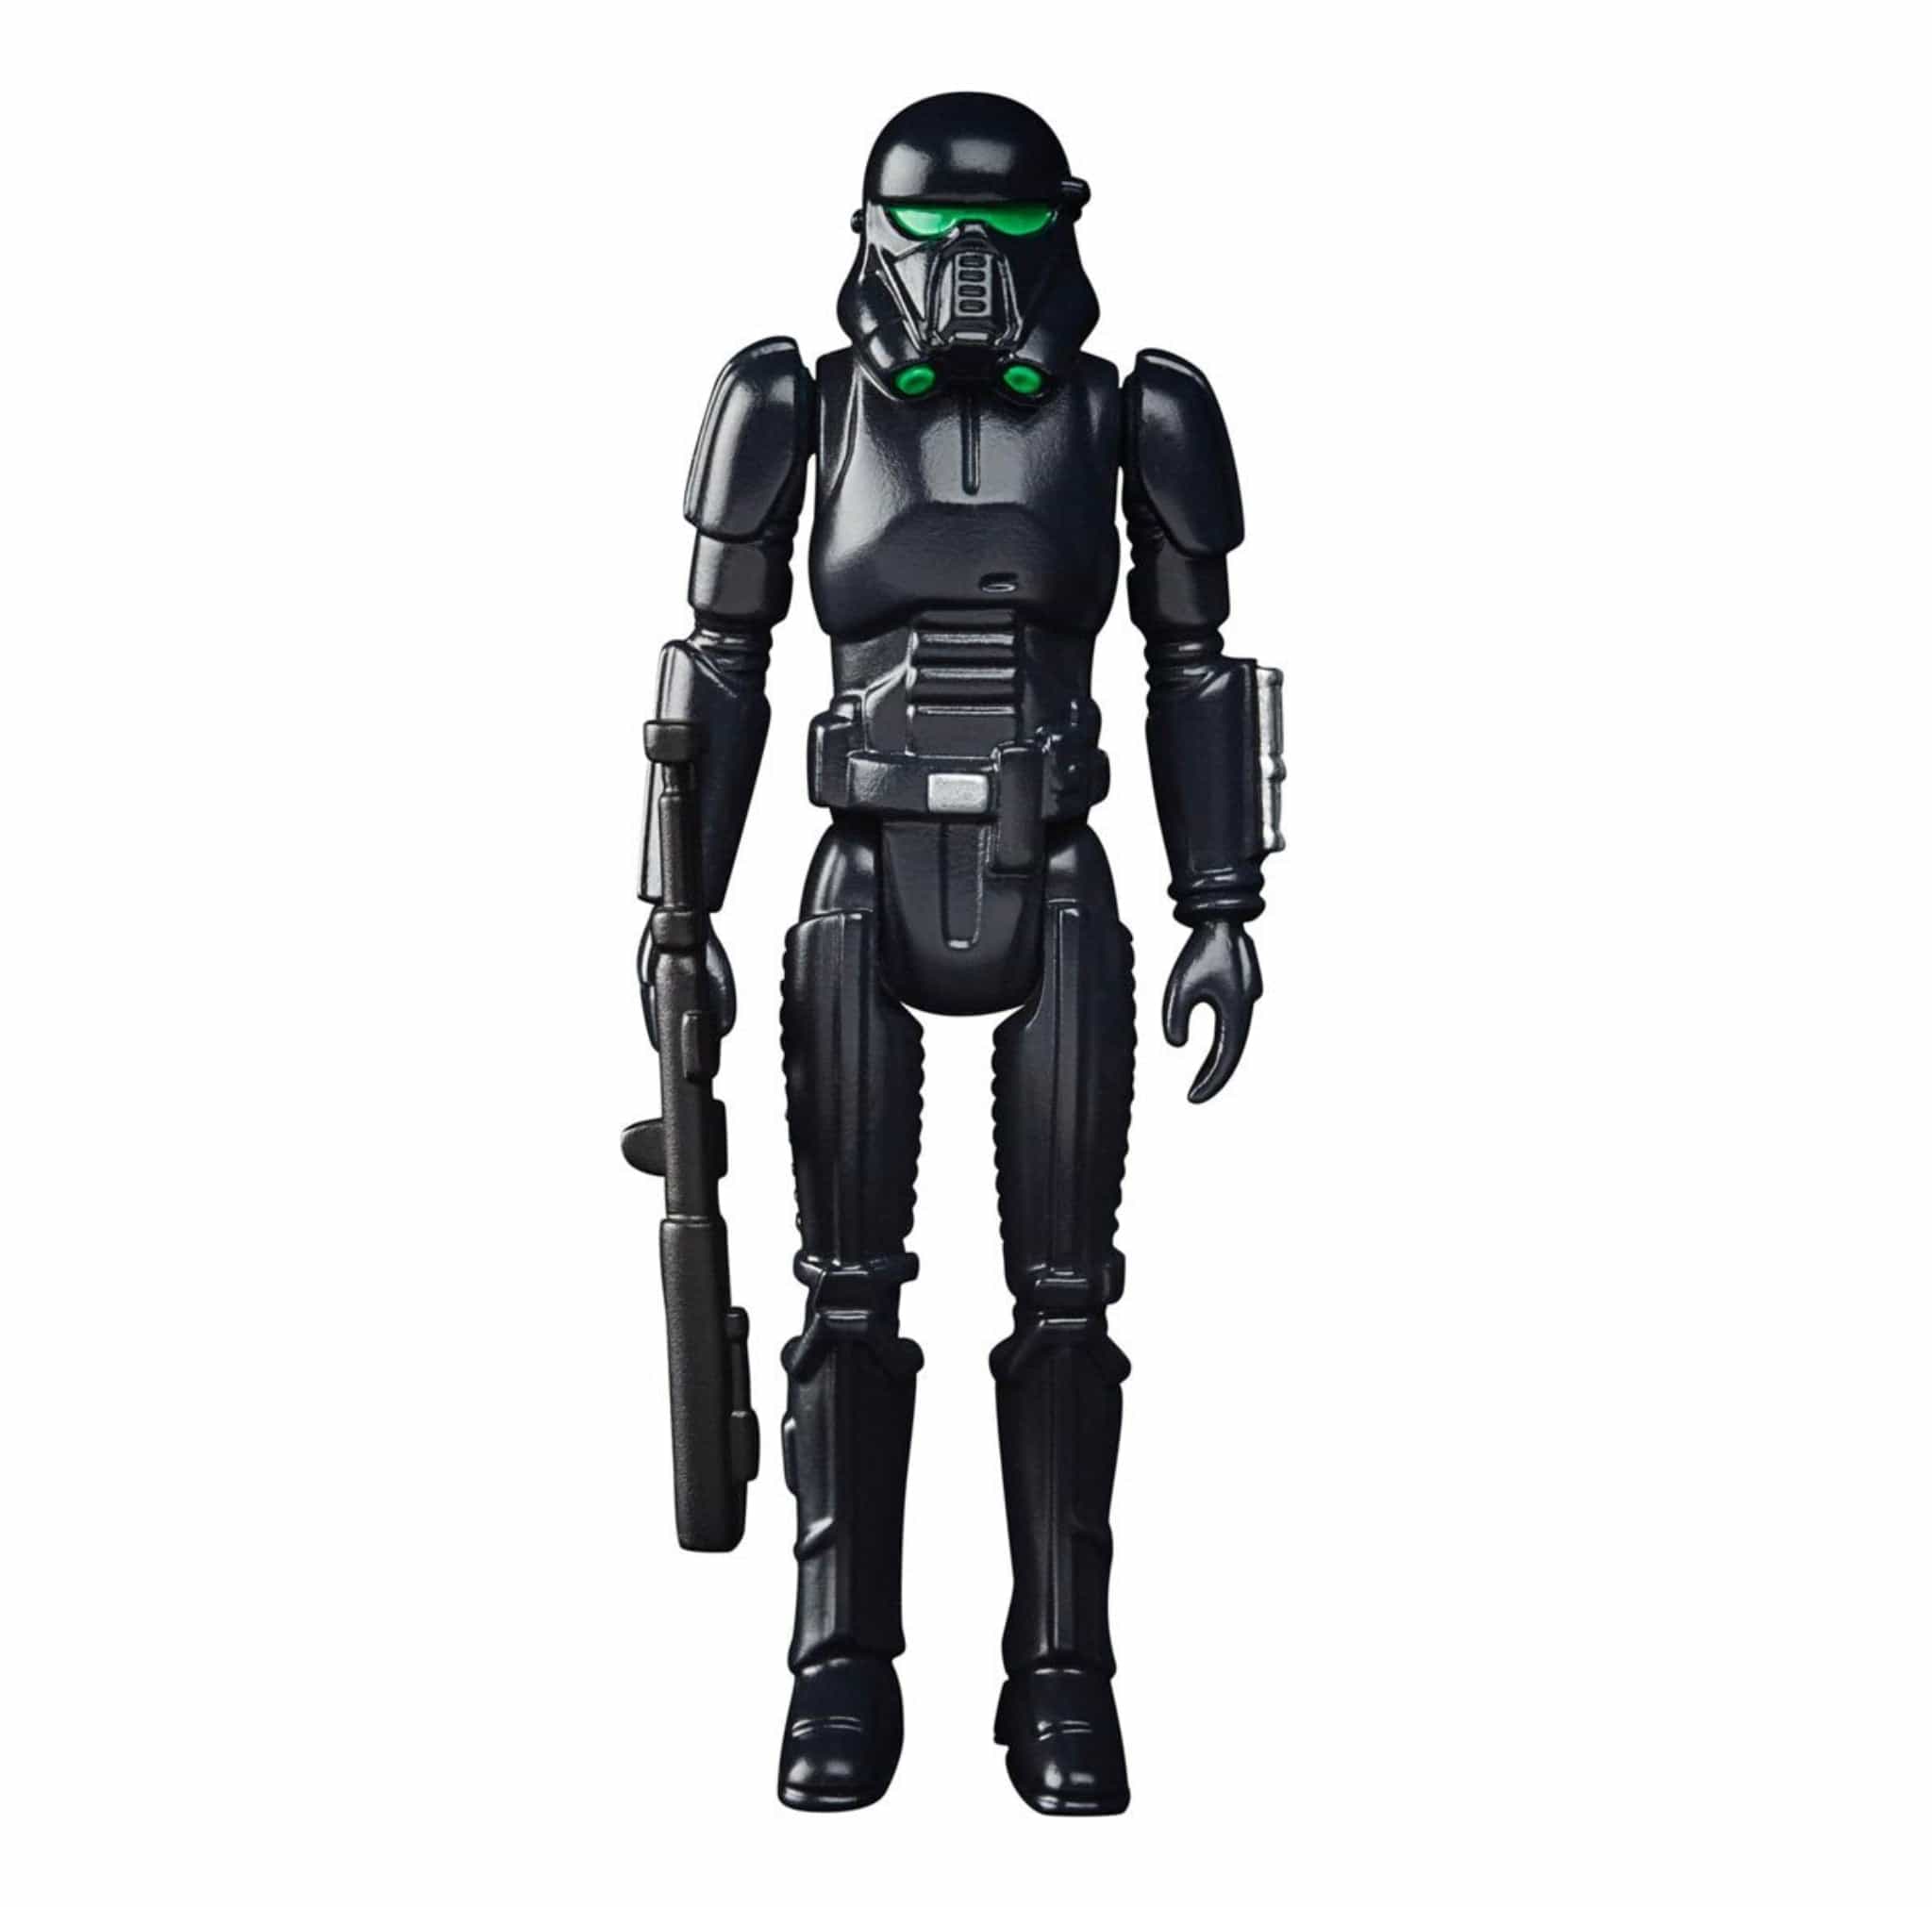 Star Wars The Retro Collection Imperial Death Trooper 3 3/4-Inch Action Figure